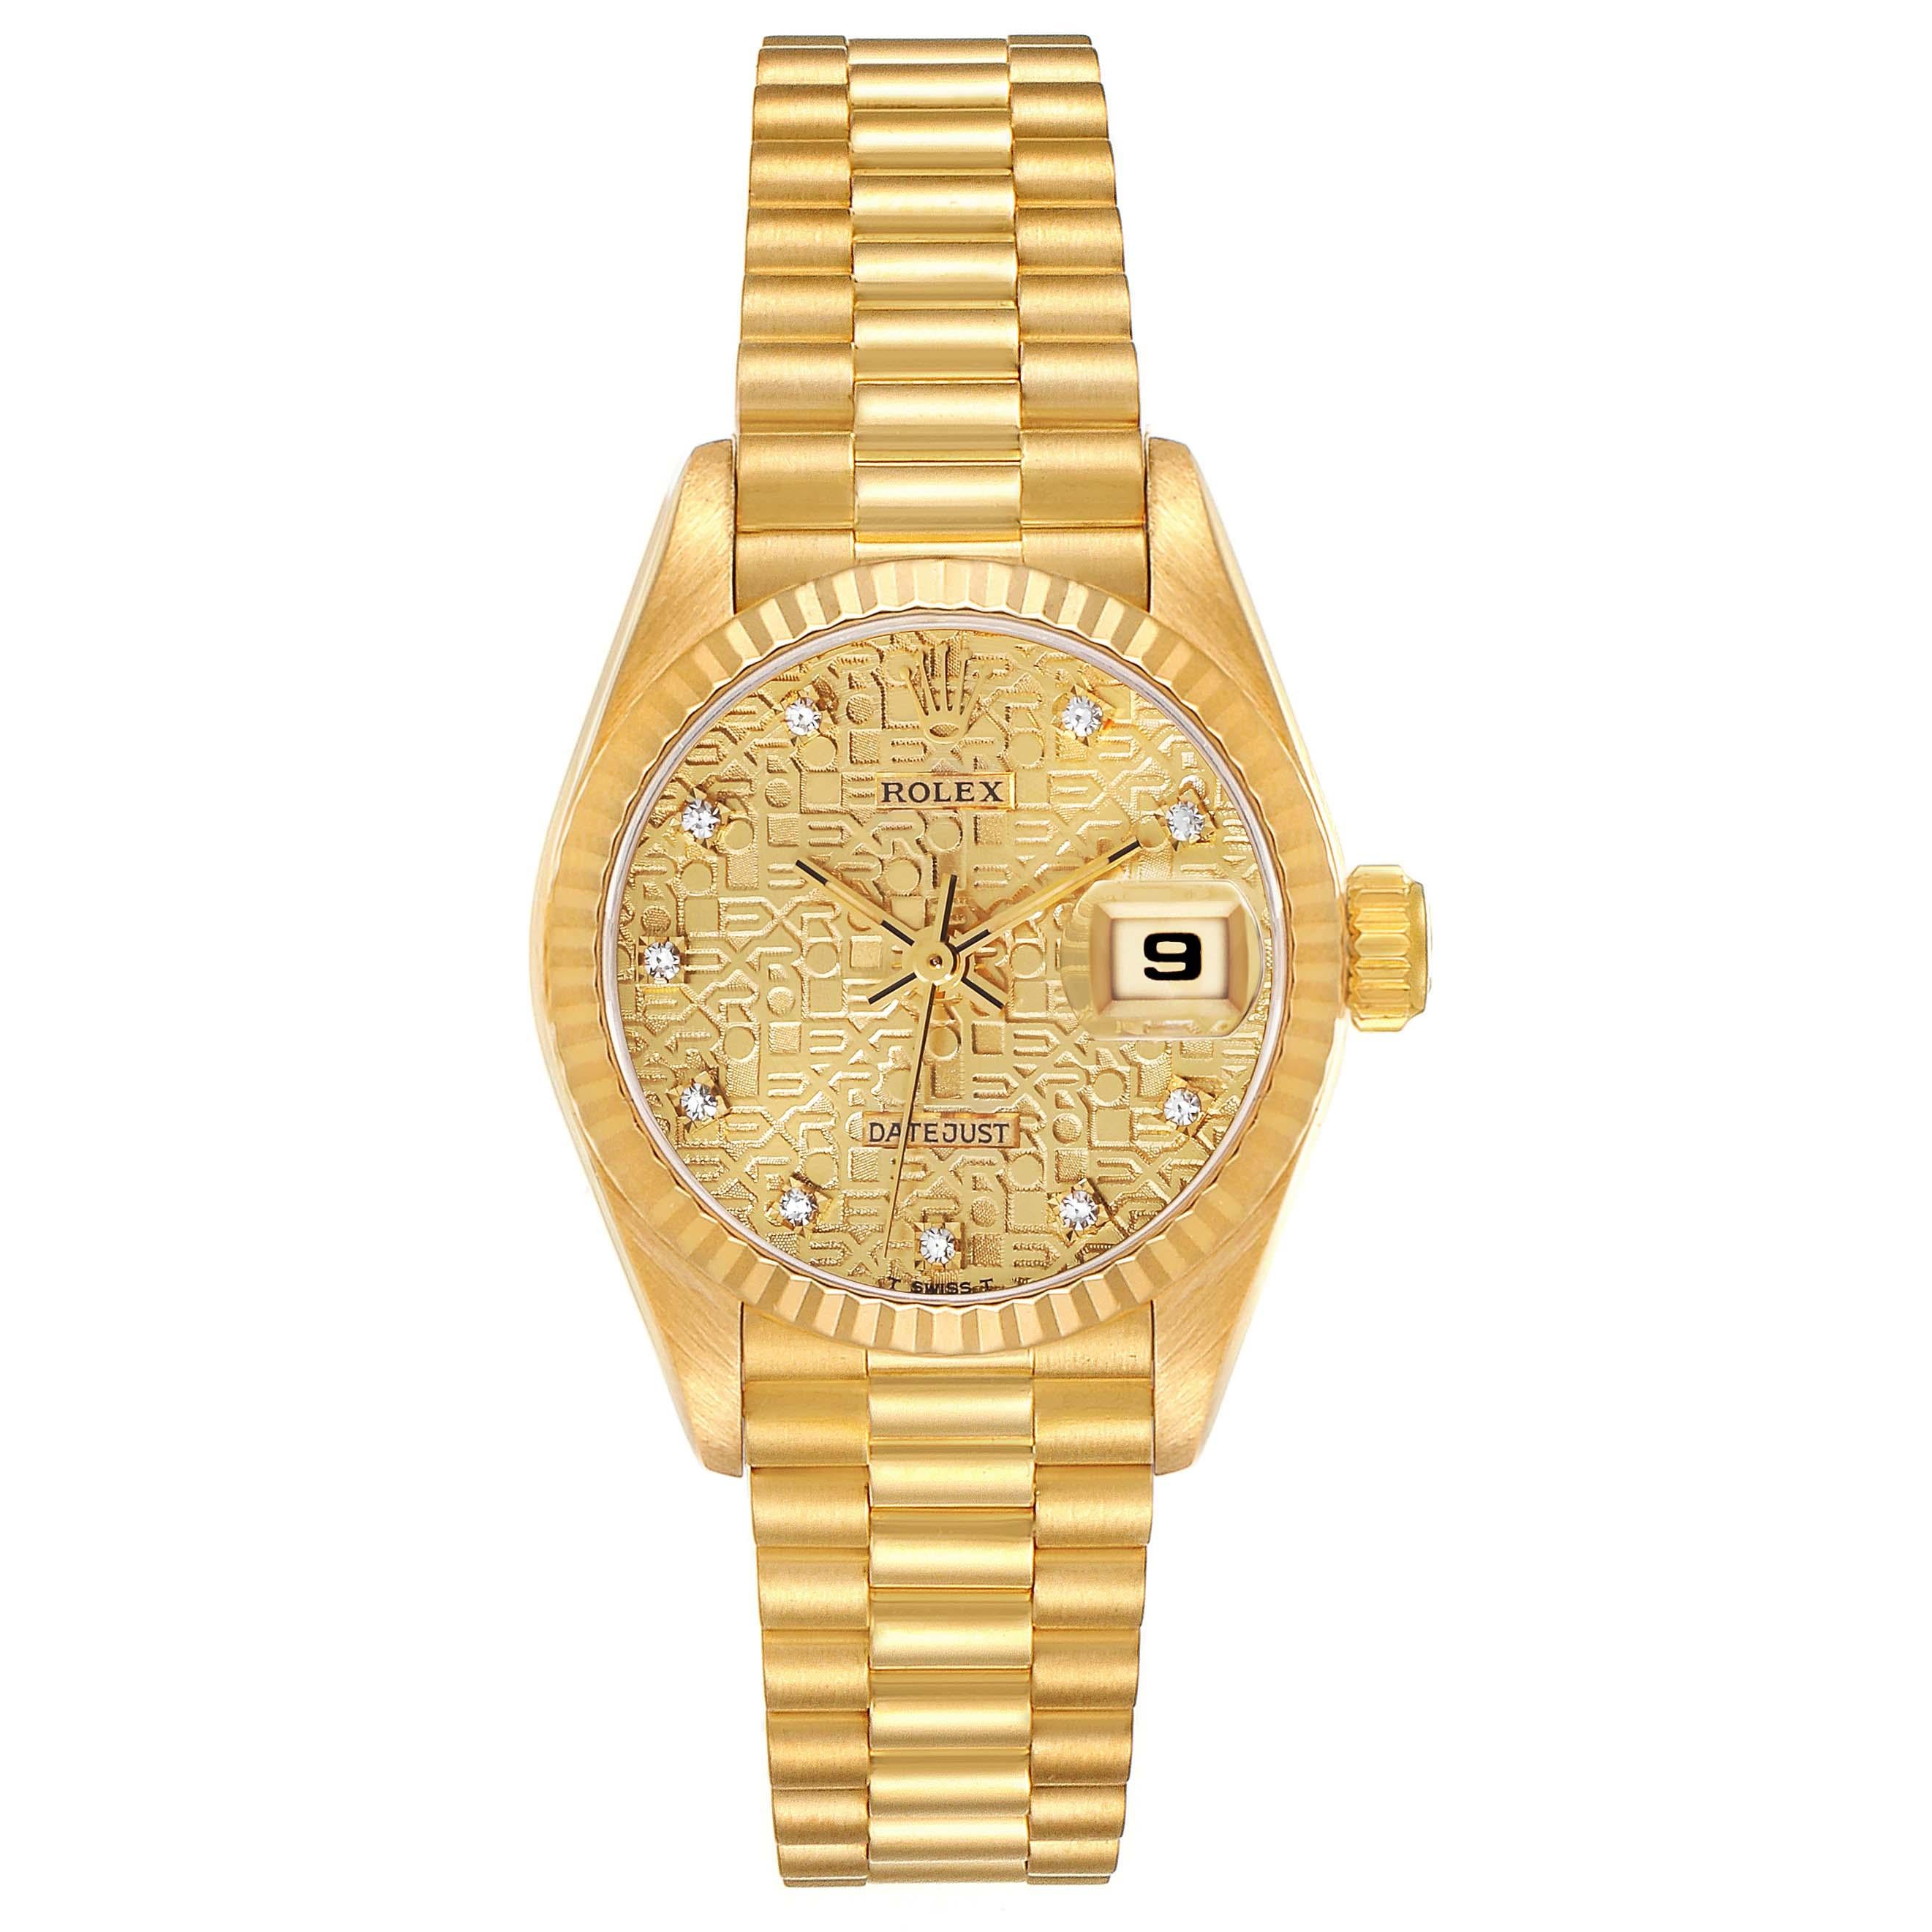 Rolex President Anniversary Diamond Dial Yellow Gold Ladies Watch 69178 Papers. Officially certified chronometer automatic self-winding movement. 18k yellow gold oyster case 26.0 mm in diameter. Rolex logo on the crown. 18k yellow gold fluted bezel.